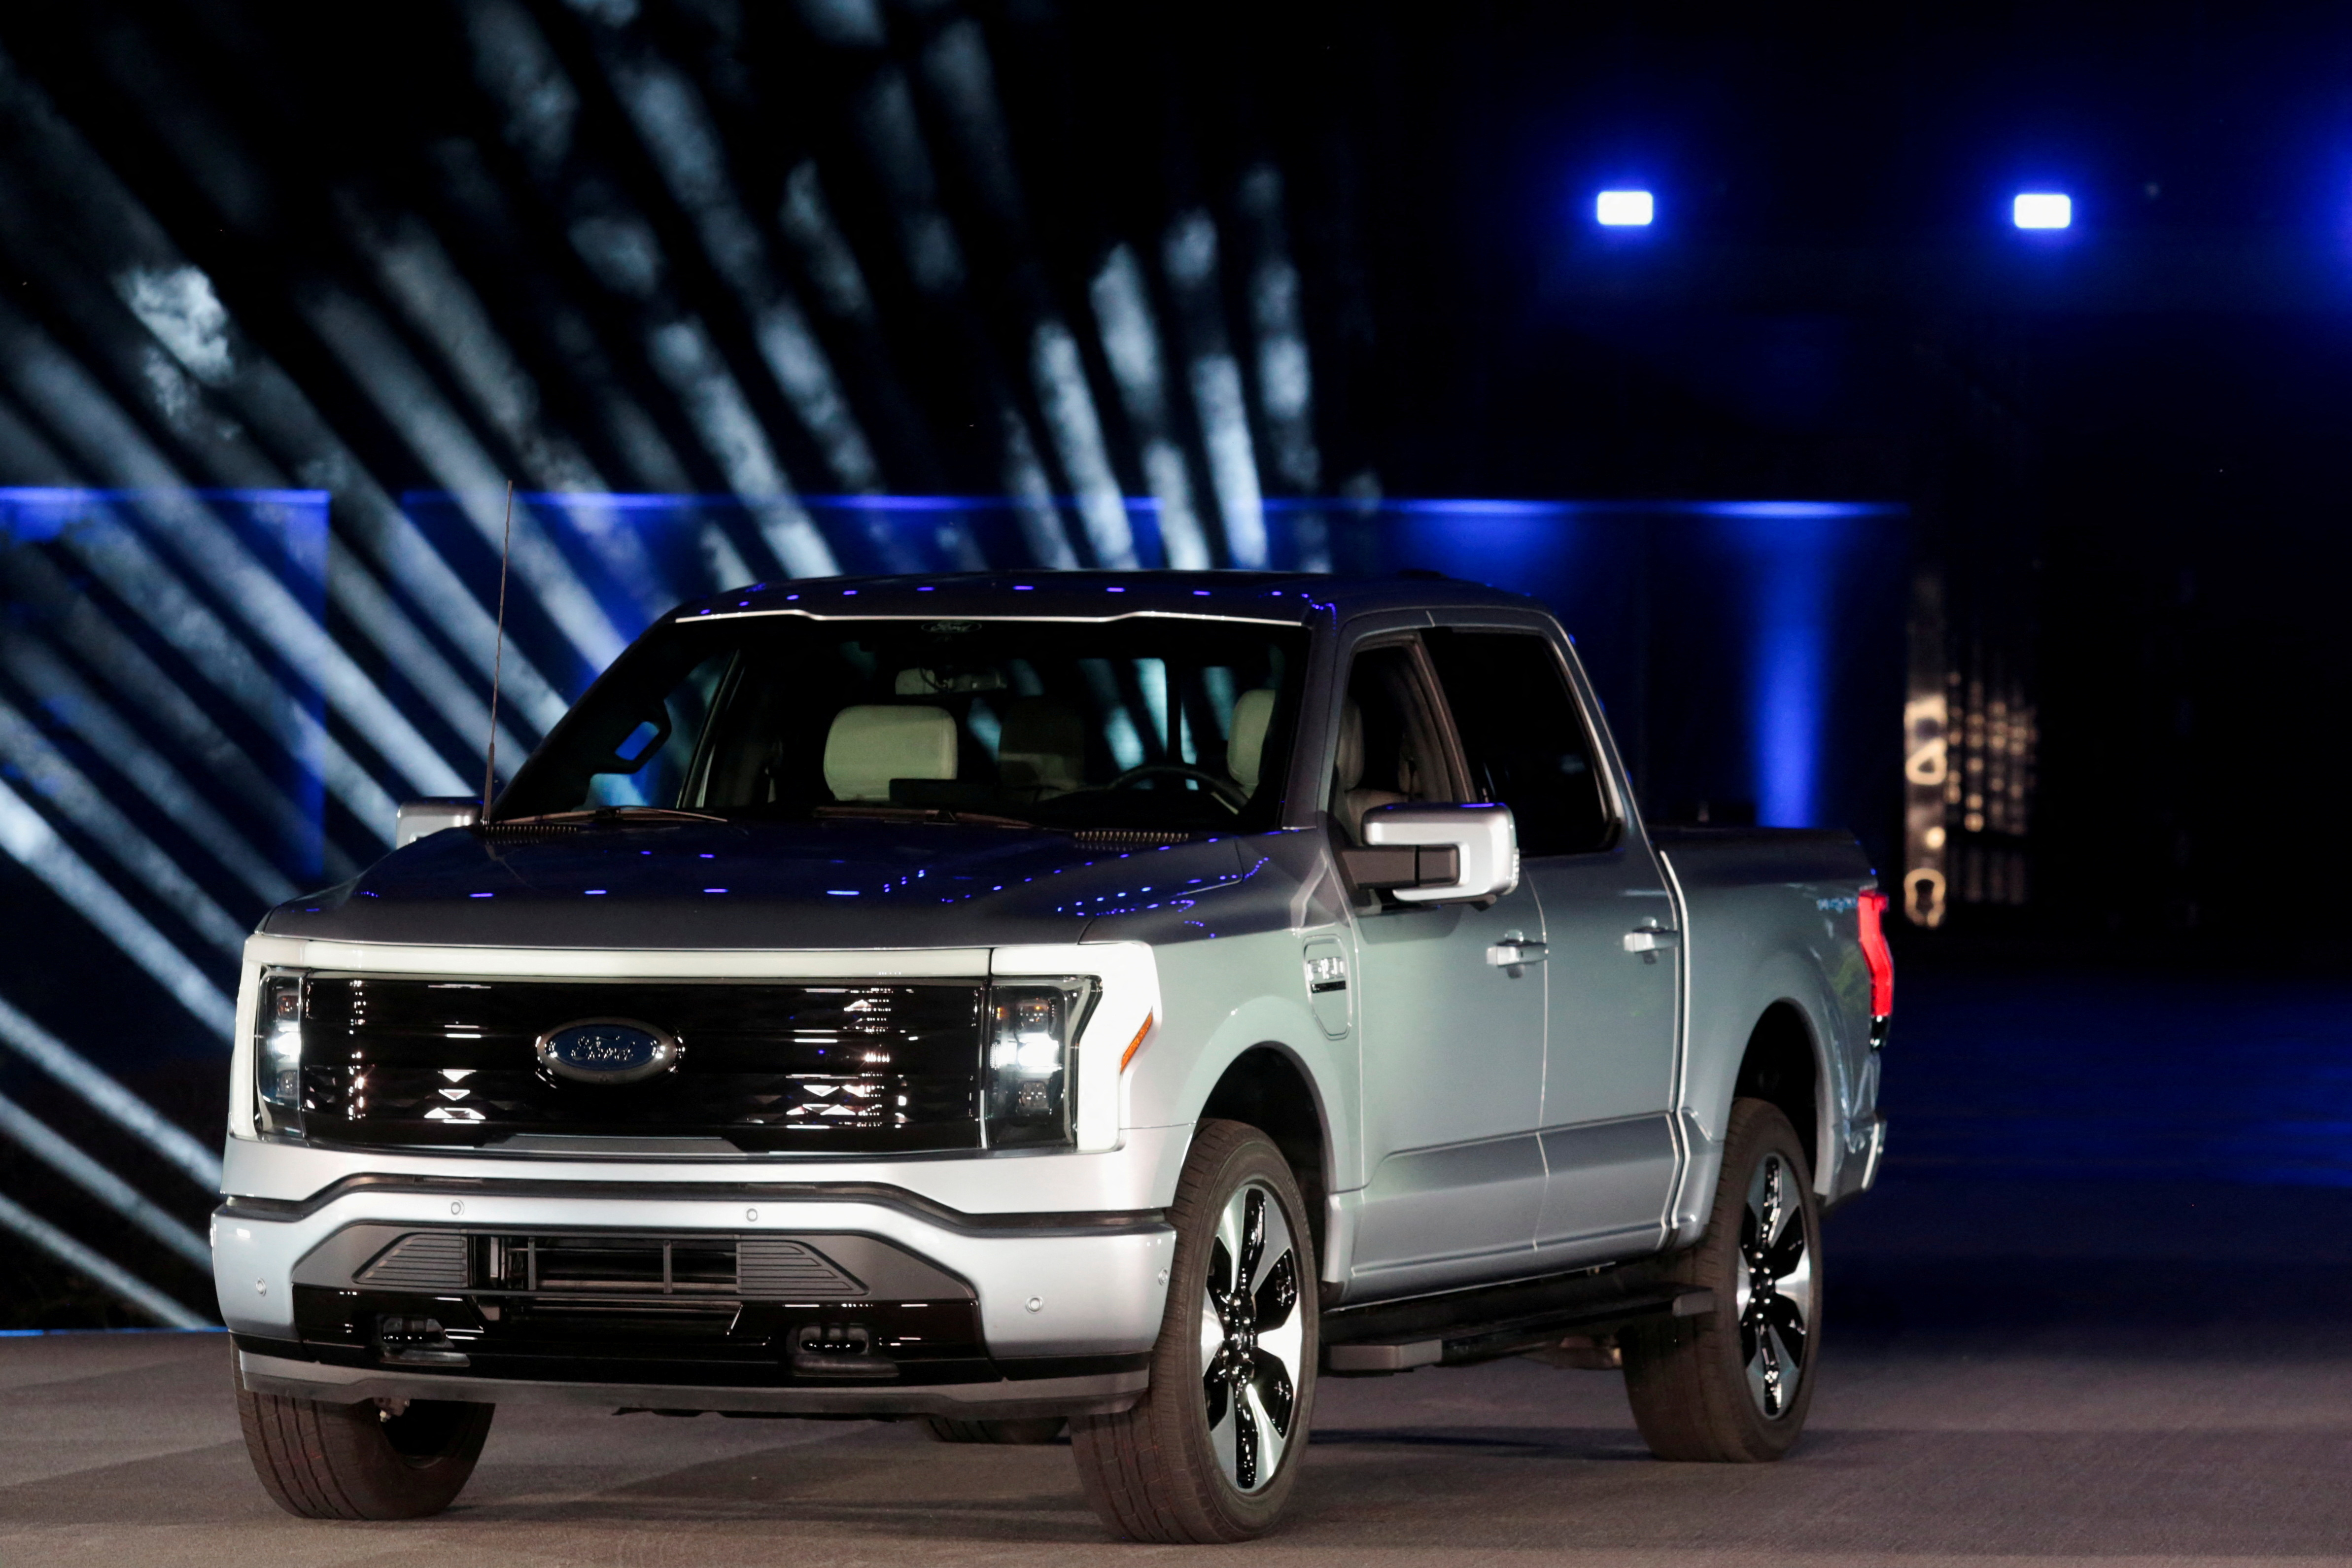 In Dearborn, the all-electric Ford F-150 Lightning pickup truck was unveiled.